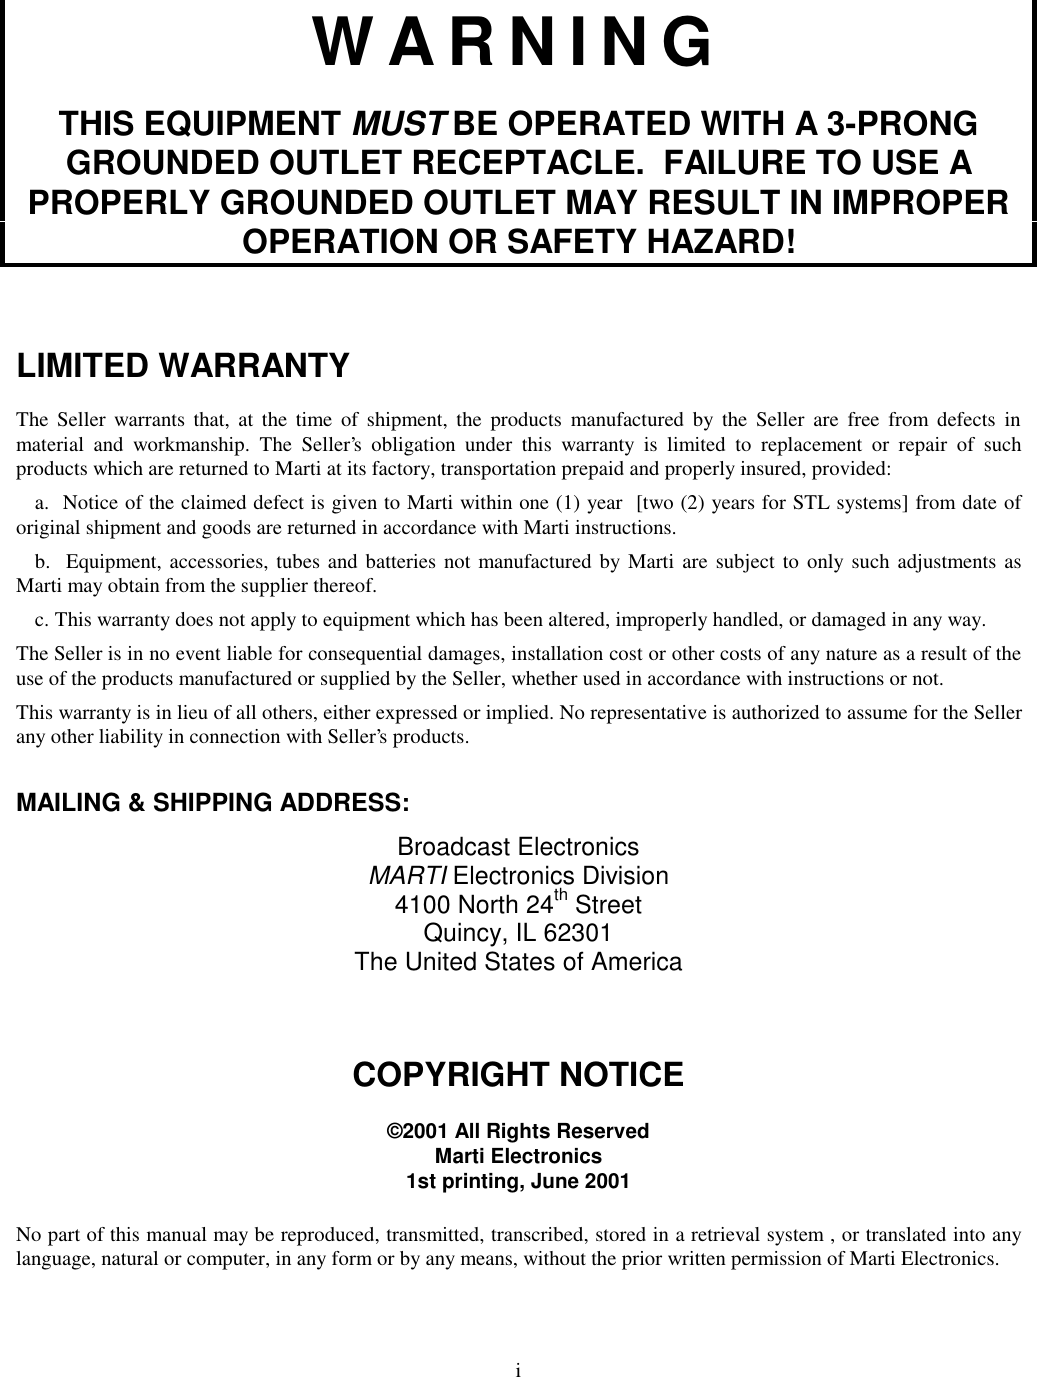 iWARNINGTHIS EQUIPMENT MUST BE OPERATED WITH A 3-PRONGGROUNDED OUTLET RECEPTACLE.  FAILURE TO USE APROPERLY GROUNDED OUTLET MAY RESULT IN IMPROPEROPERATION OR SAFETY HAZARD!LIMITED WARRANTYThe Seller warrants that, at the time of shipment, the products manufactured by the Seller are free from defects inmaterial and workmanship. The Seller’s obligation under this warranty is limited to replacement or repair of suchproducts which are returned to Marti at its factory, transportation prepaid and properly insured, provided:a.  Notice of the claimed defect is given to Marti within one (1) year  [two (2) years for STL systems] from date oforiginal shipment and goods are returned in accordance with Marti instructions.b.  Equipment, accessories, tubes and batteries not manufactured by Marti are subject to only such adjustments asMarti may obtain from the supplier thereof.c. This warranty does not apply to equipment which has been altered, improperly handled, or damaged in any way.The Seller is in no event liable for consequential damages, installation cost or other costs of any nature as a result of theuse of the products manufactured or supplied by the Seller, whether used in accordance with instructions or not.This warranty is in lieu of all others, either expressed or implied. No representative is authorized to assume for the Sellerany other liability in connection with Seller’s products.MAILING &amp; SHIPPING ADDRESS:Broadcast ElectronicsMARTI Electronics Division4100 North 24th StreetQuincy, IL 62301The United States of AmericaCOPYRIGHT NOTICE©2001 All Rights ReservedMarti Electronics1st printing, June 2001No part of this manual may be reproduced, transmitted, transcribed, stored in a retrieval system , or translated into anylanguage, natural or computer, in any form or by any means, without the prior written permission of Marti Electronics.